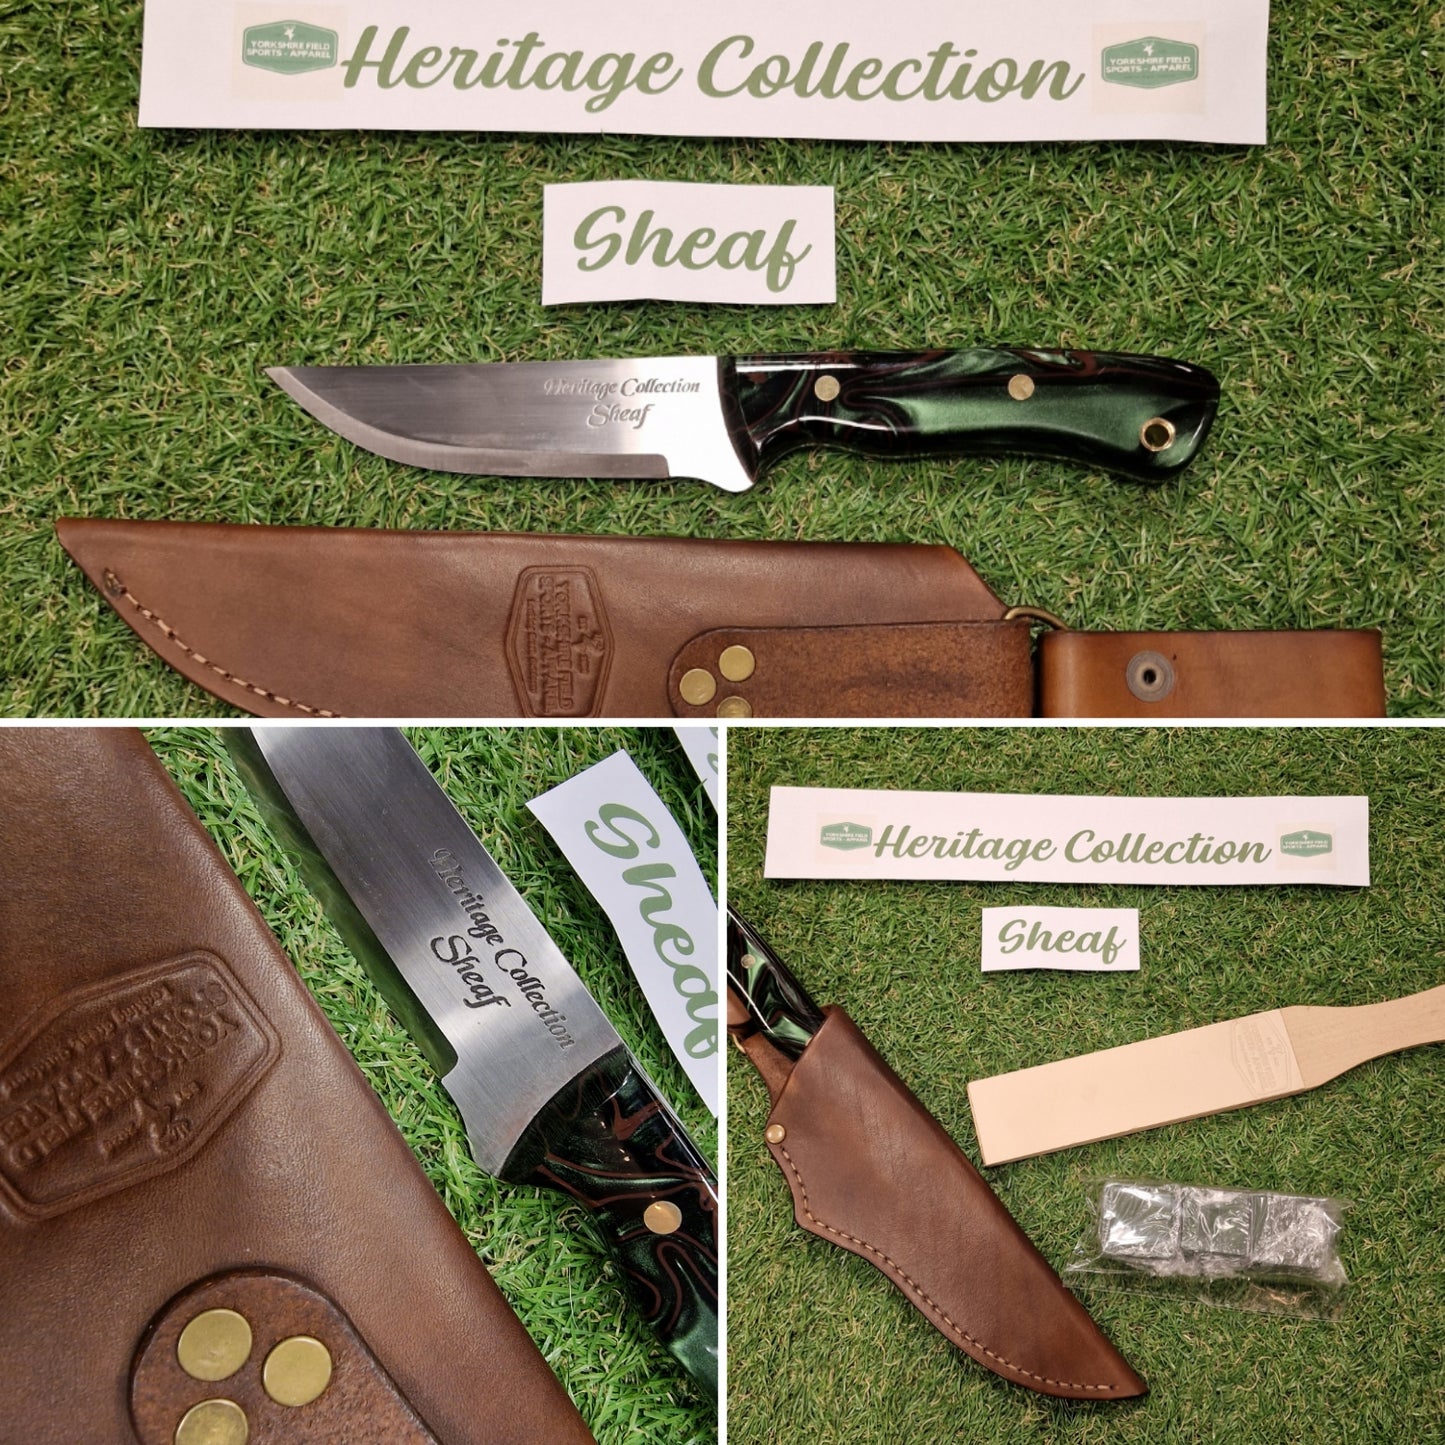 Yorkshire Field Sports-Apparel "Heritage collection" Sheaf forged in Sheffield "ID MUST BE SENT PRIOR TO DESPATCH OVER 18s ONLY"